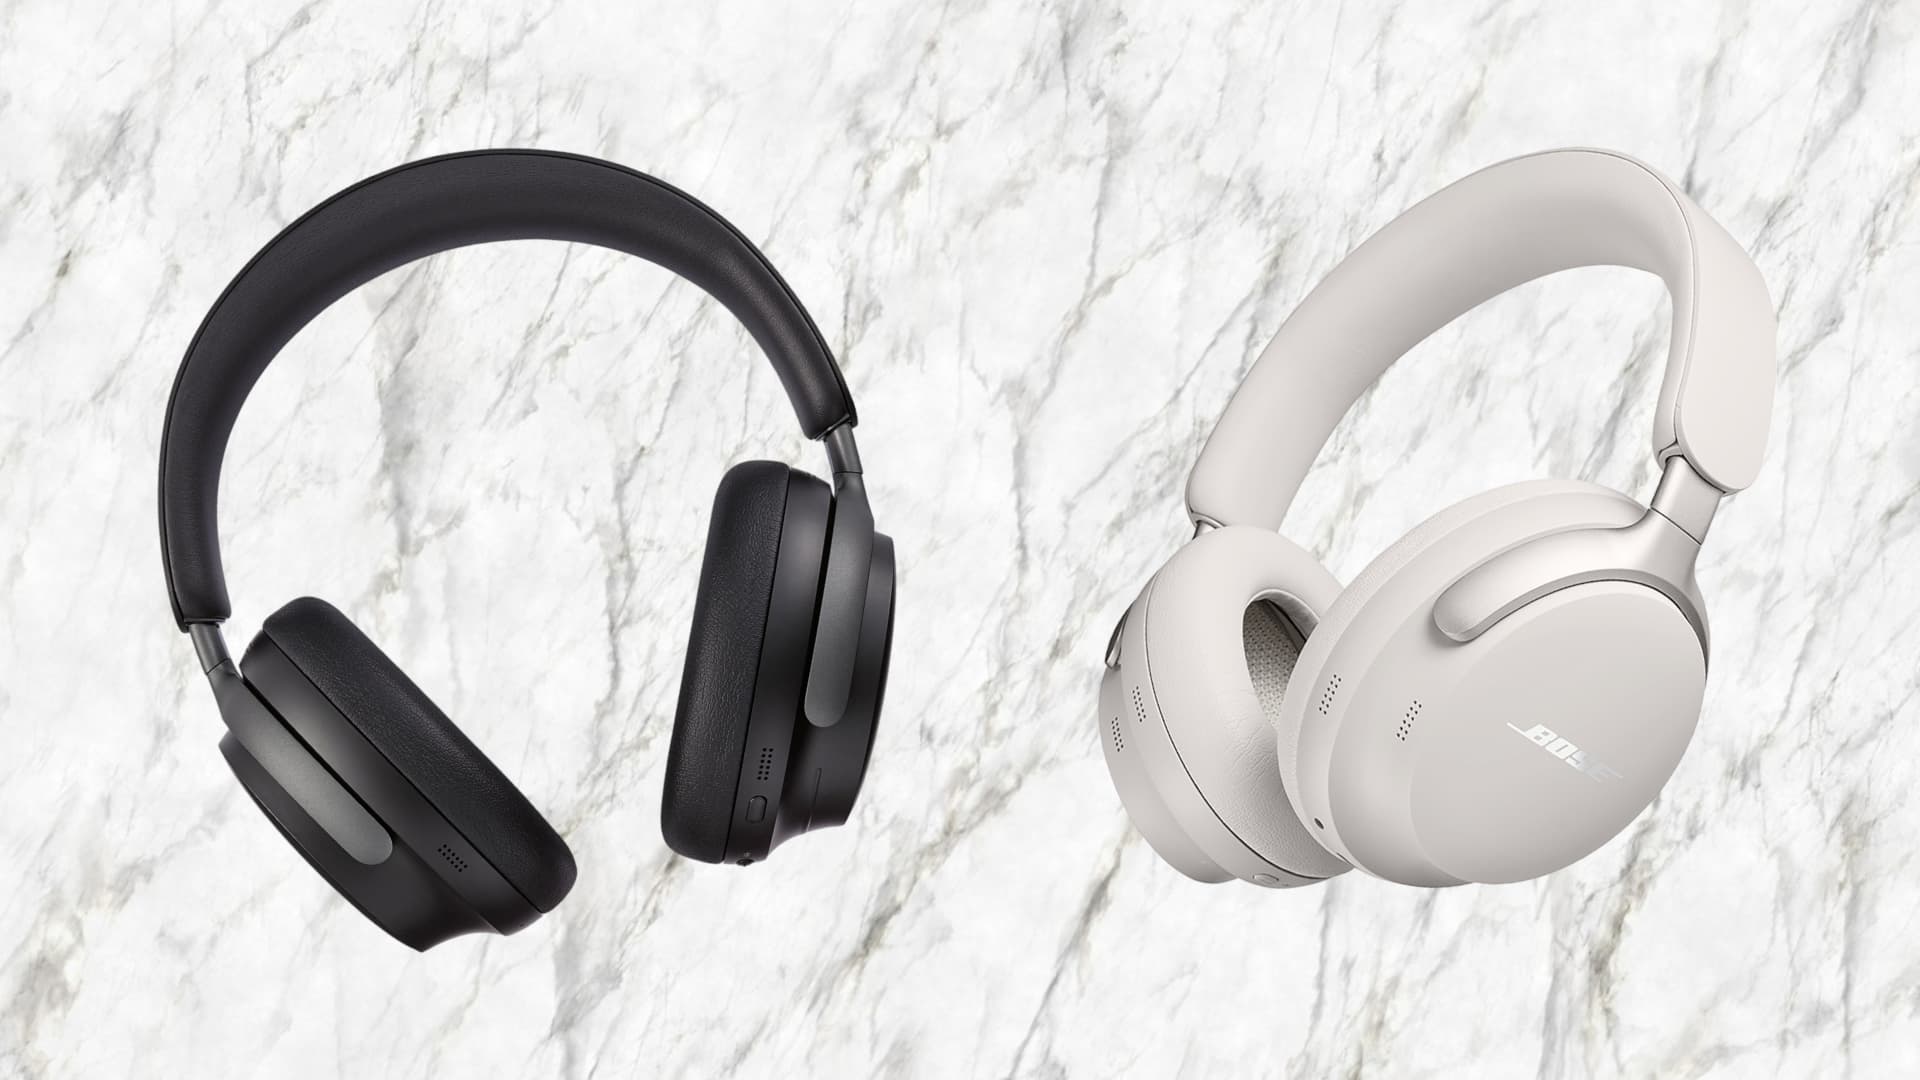 Bose announces new Ultra line of headphones with spatial audio